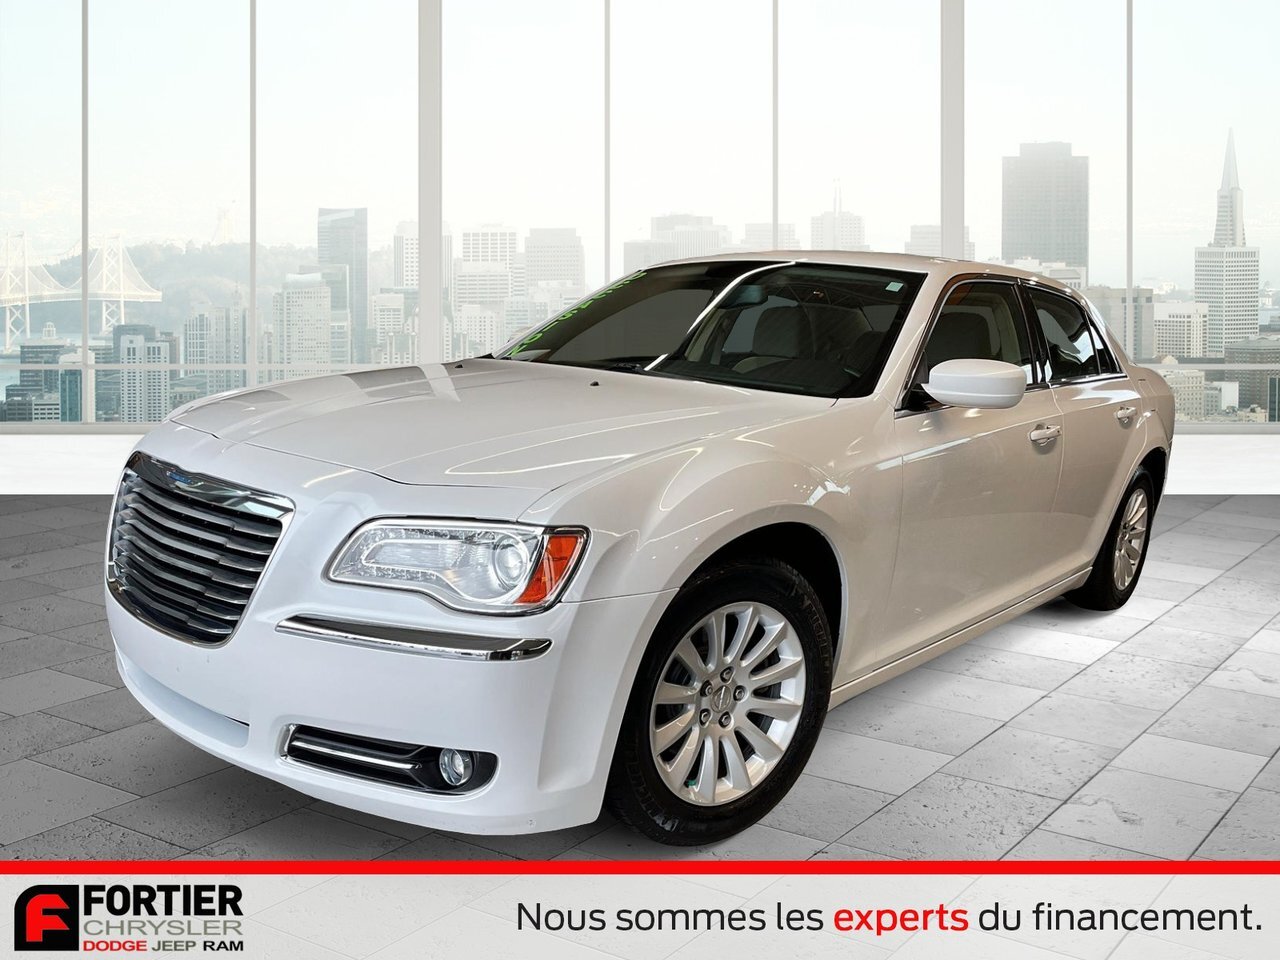 2014 Chrysler 300 Touring UCONNECT 8.4 + AUTO + LOW MILLAGE / UCONNE